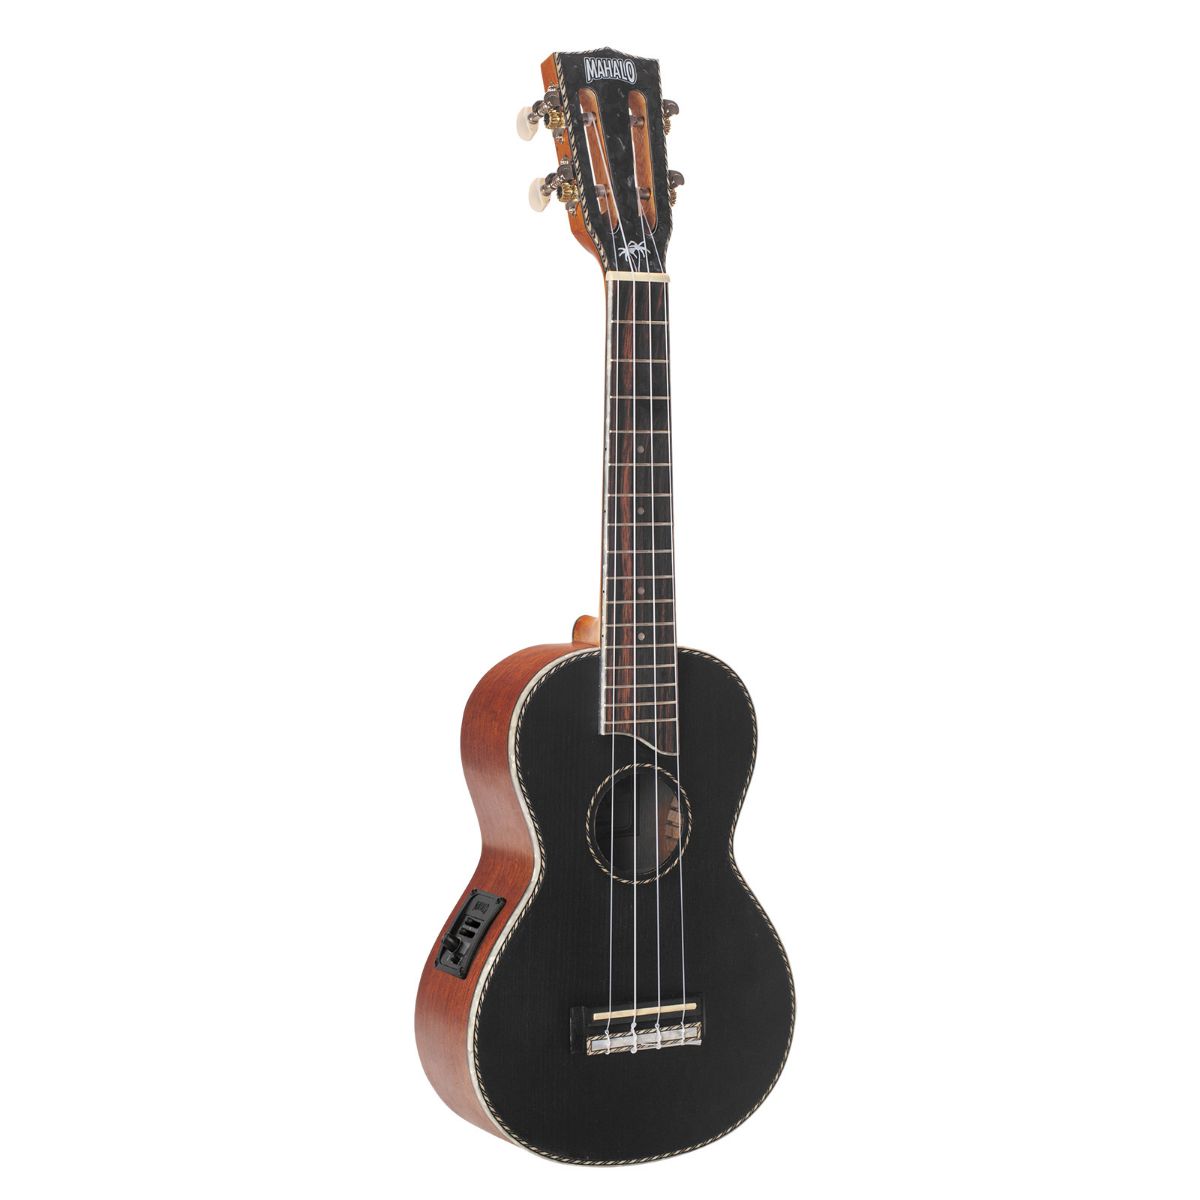 Mahalo Pearl Series Acoustic-Electric Concert Ukulele